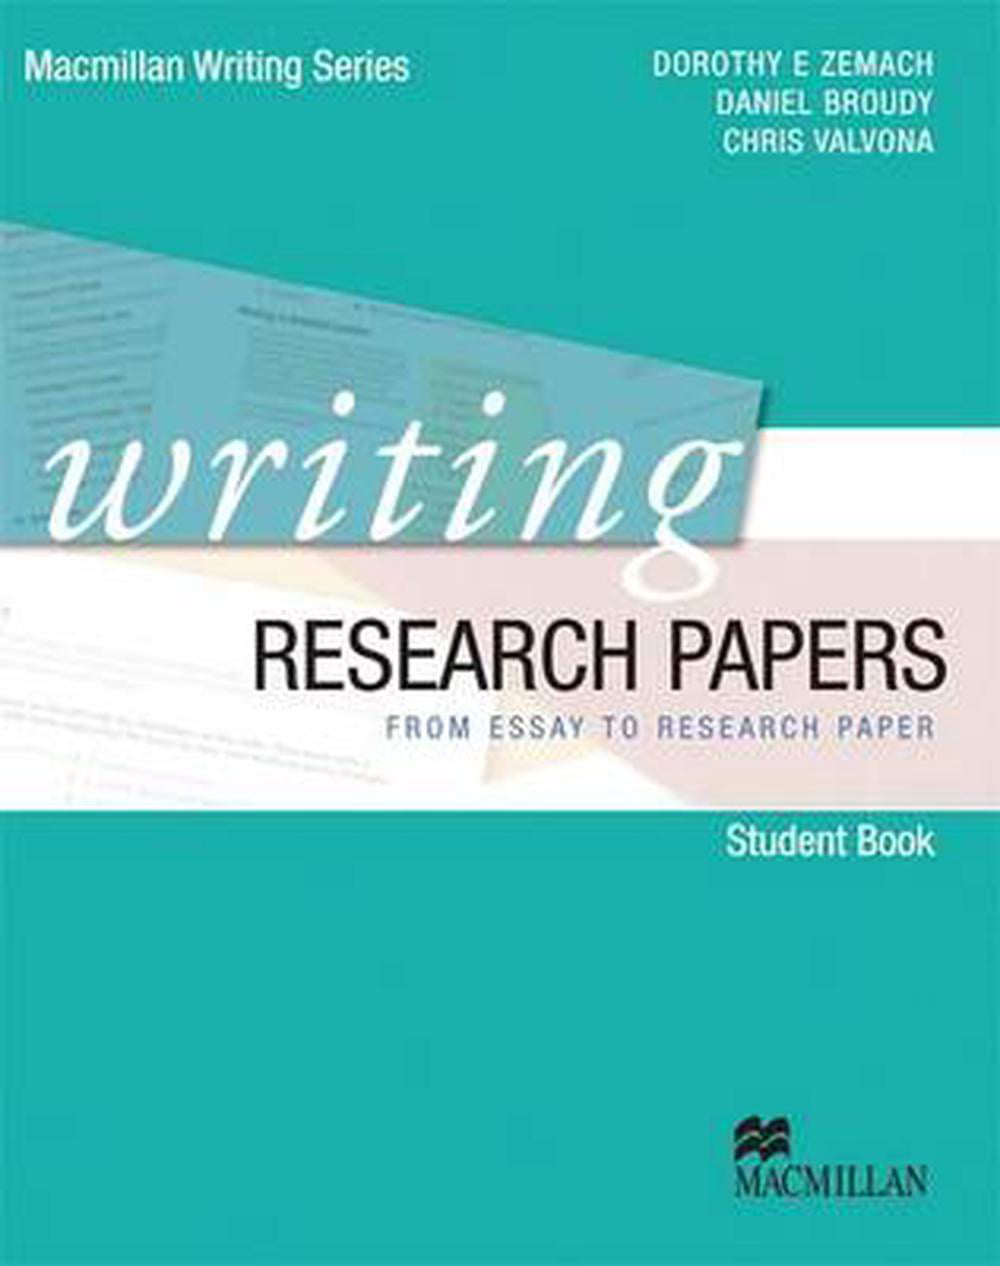 research and writing book